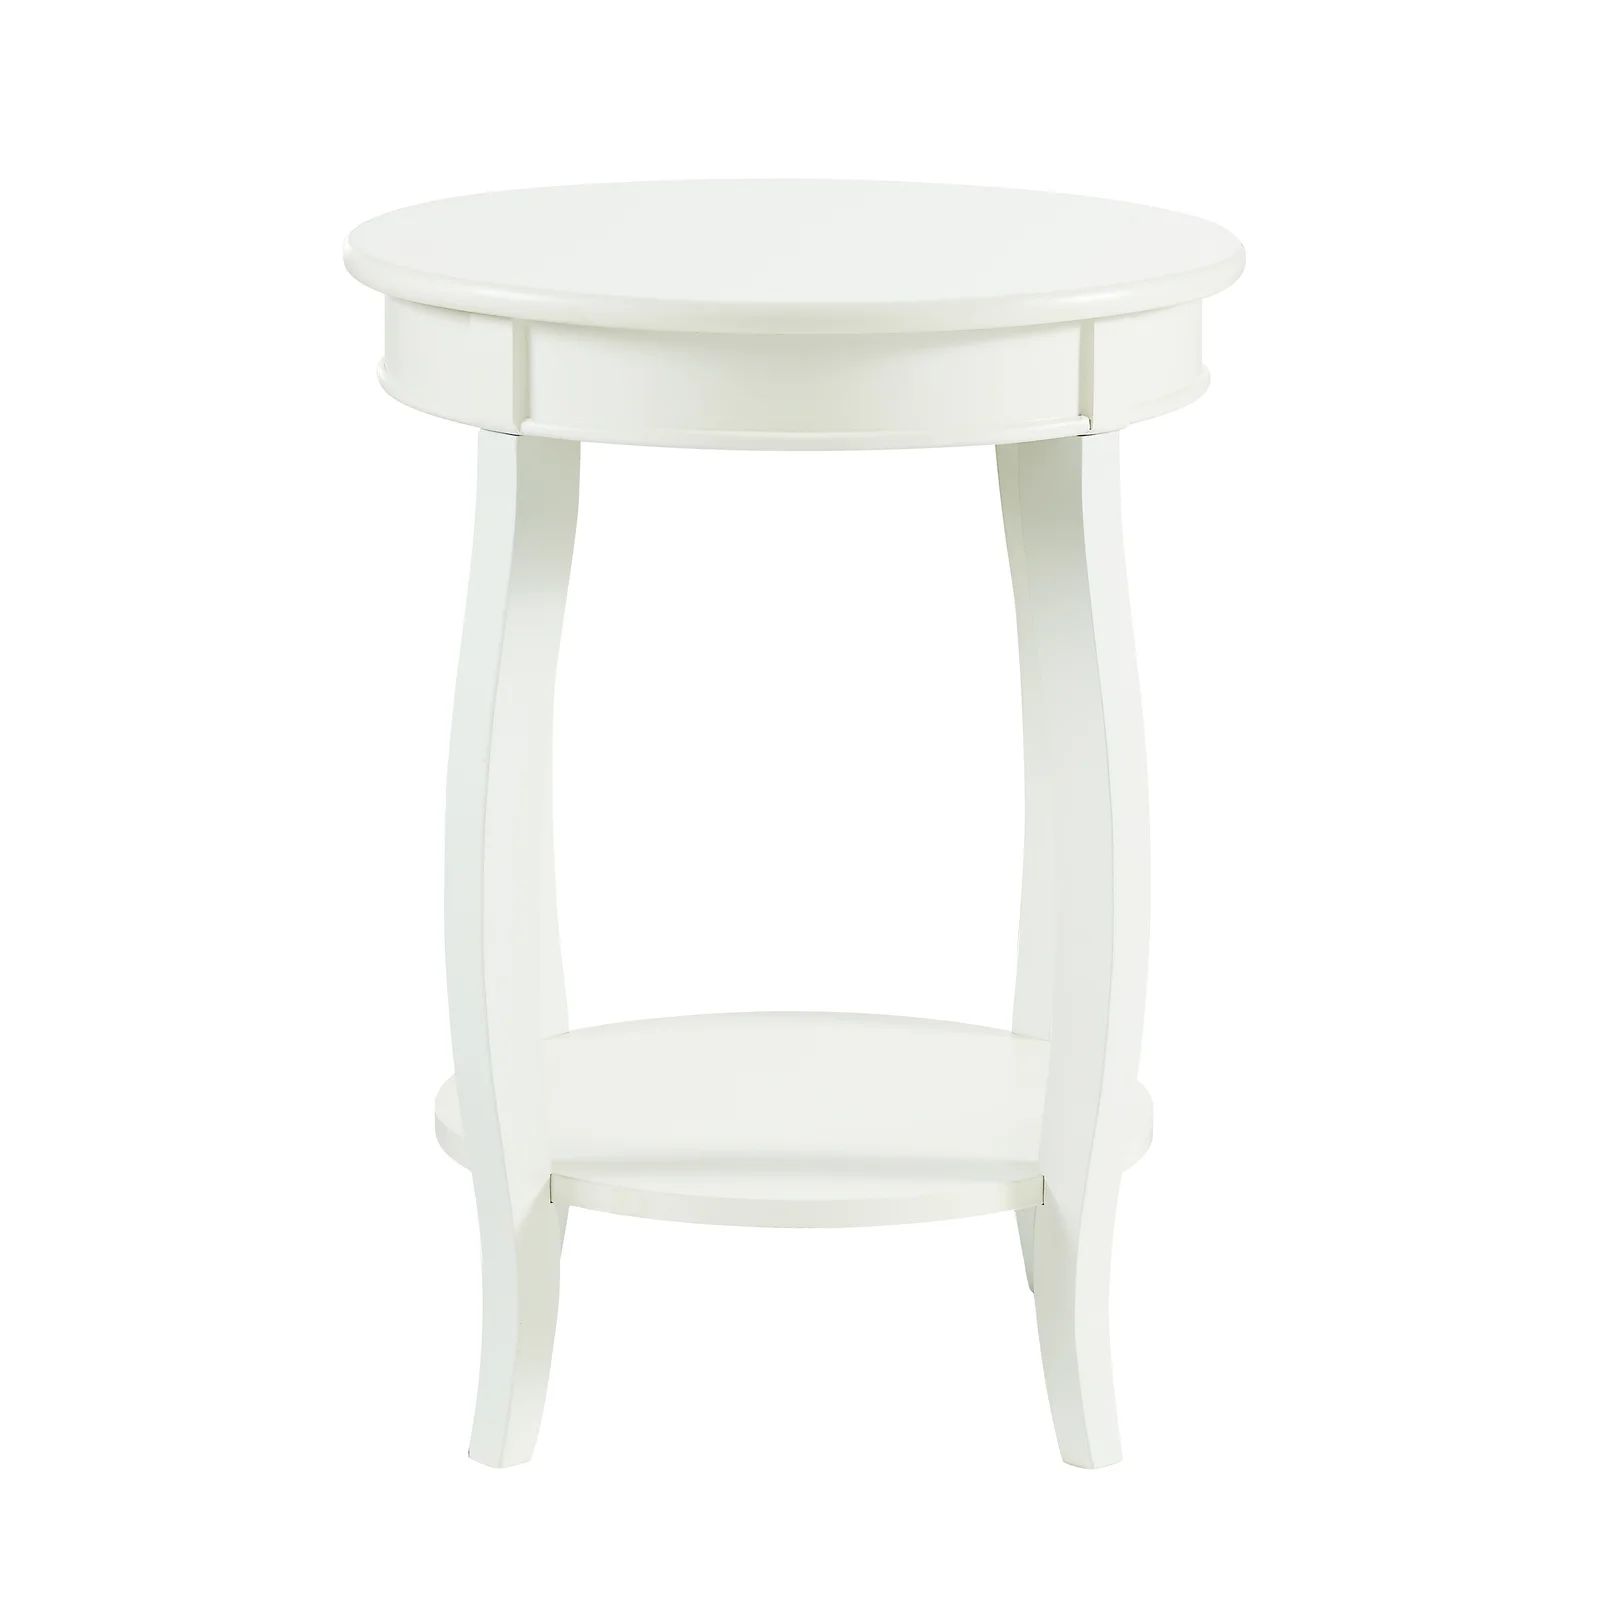 Carminella End Table with Storage | Wayfair Professional